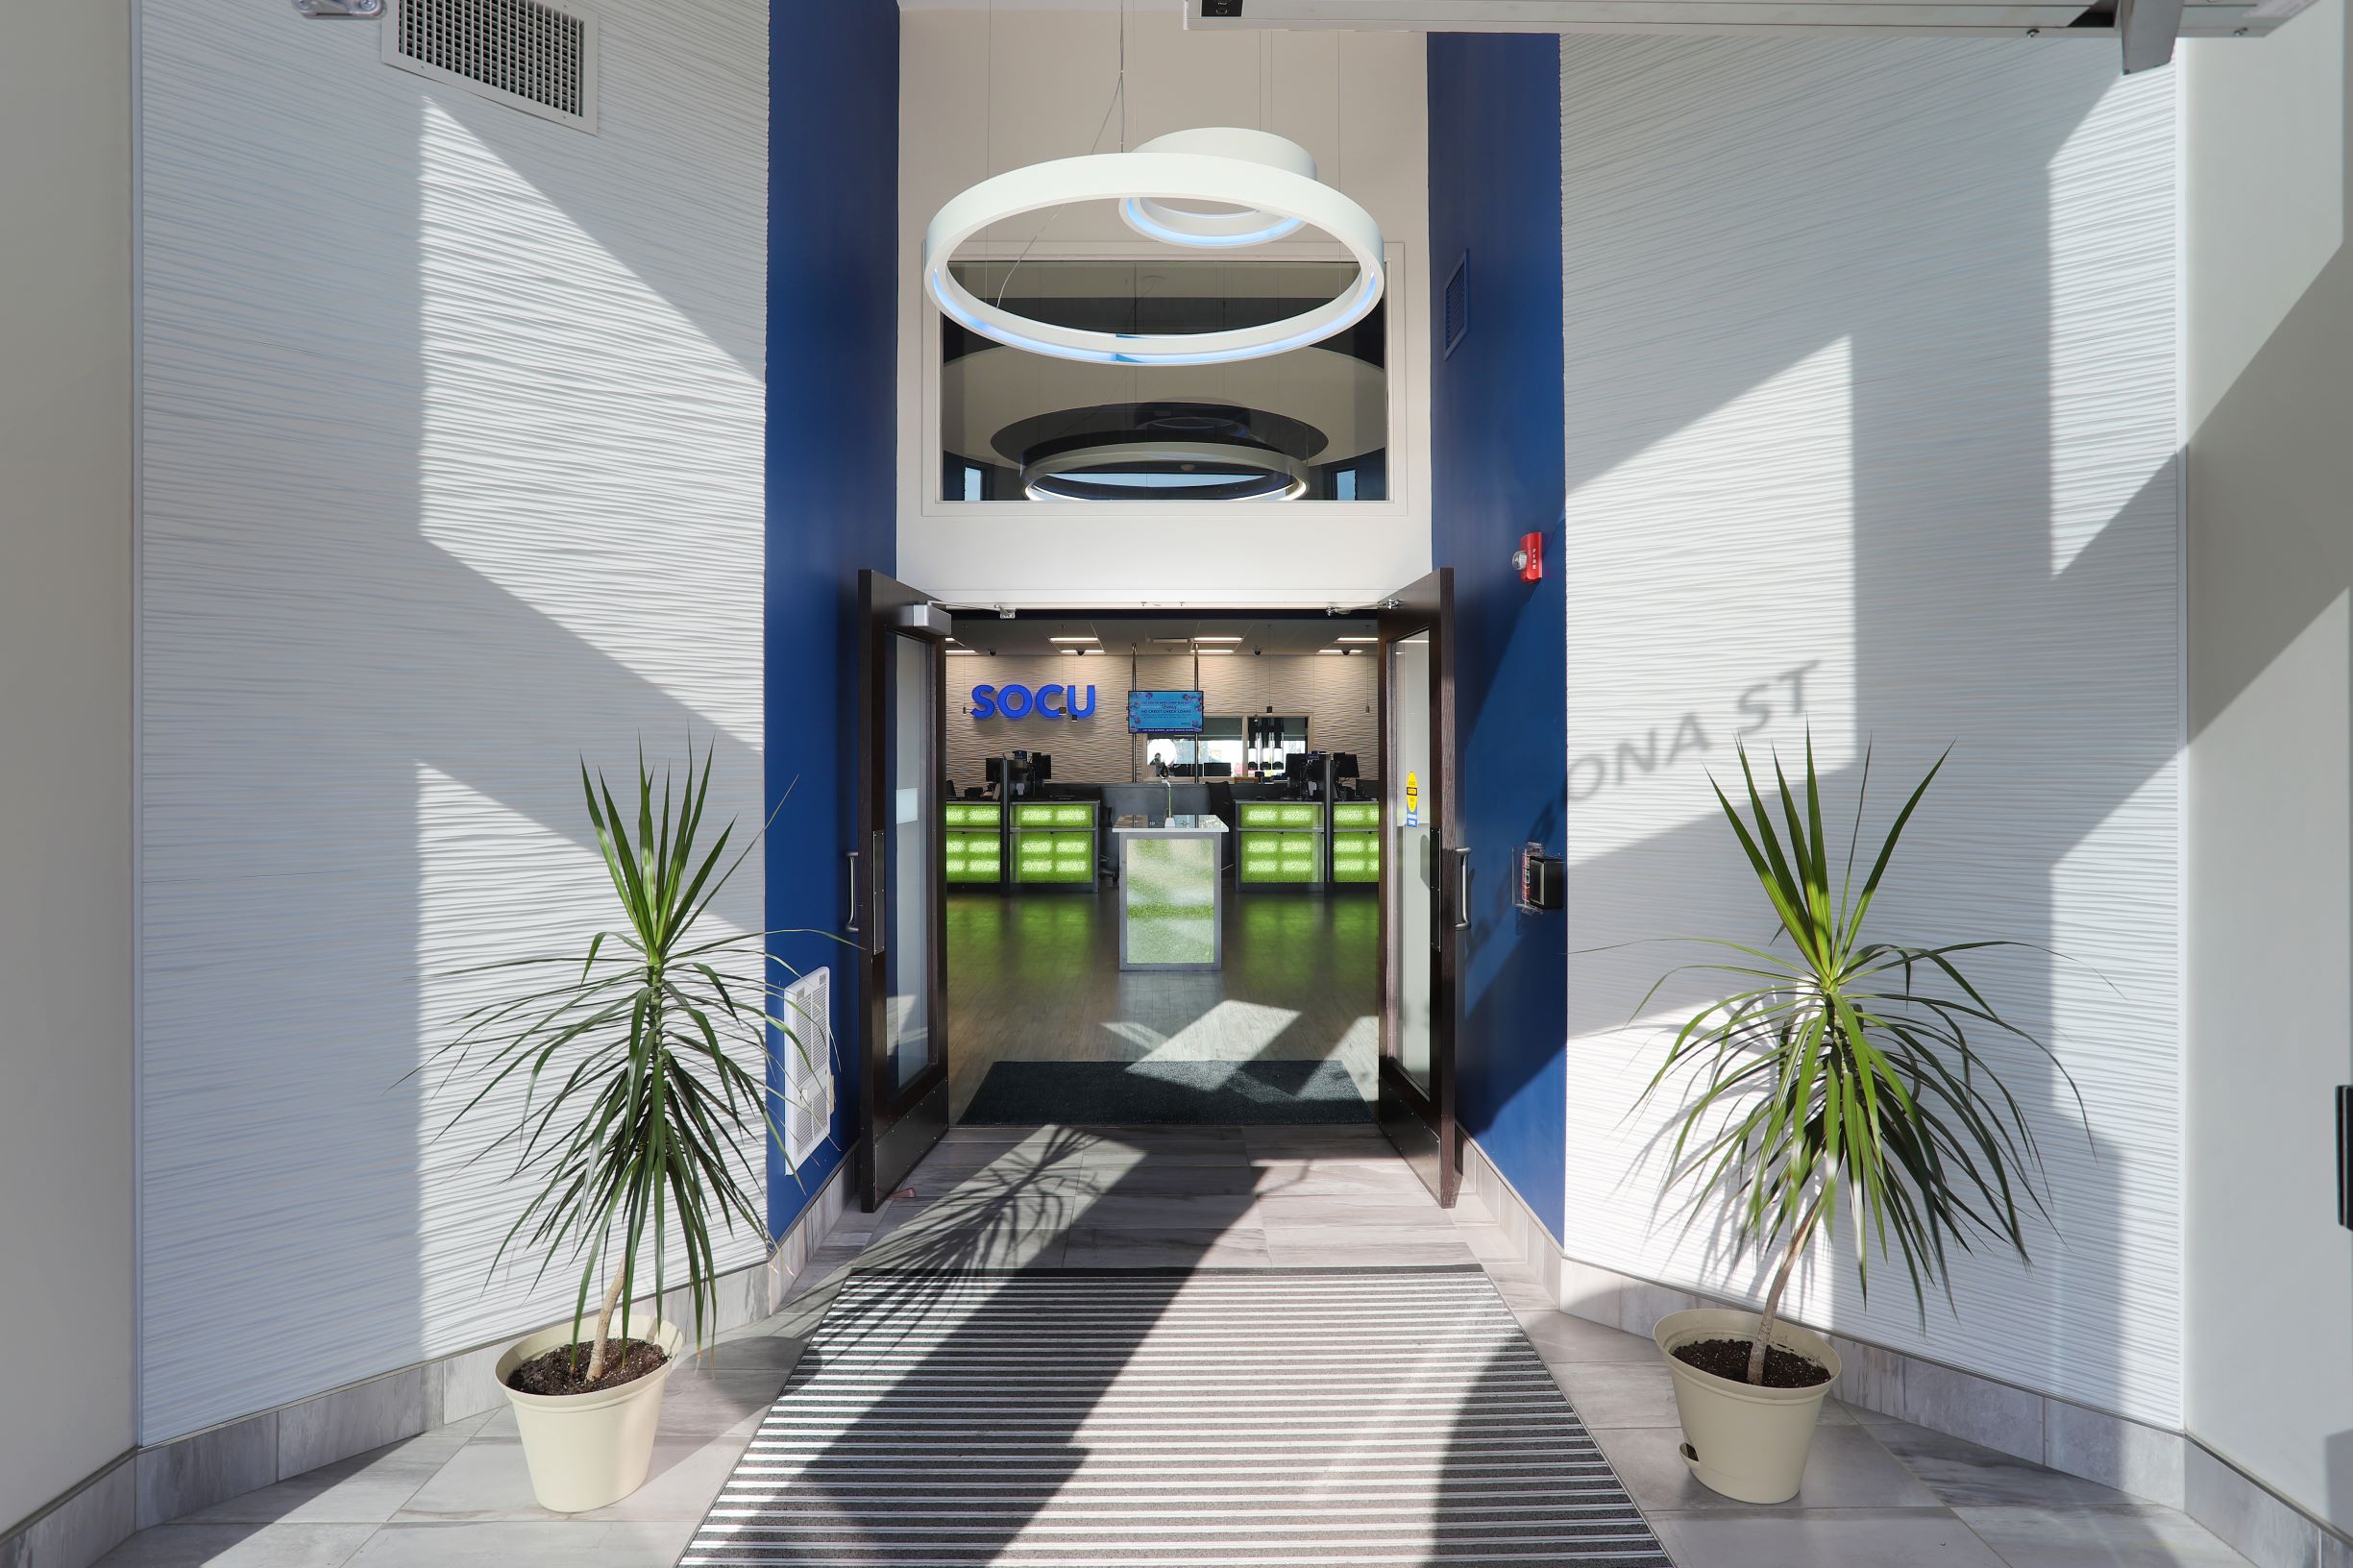 Entrance into the credit union